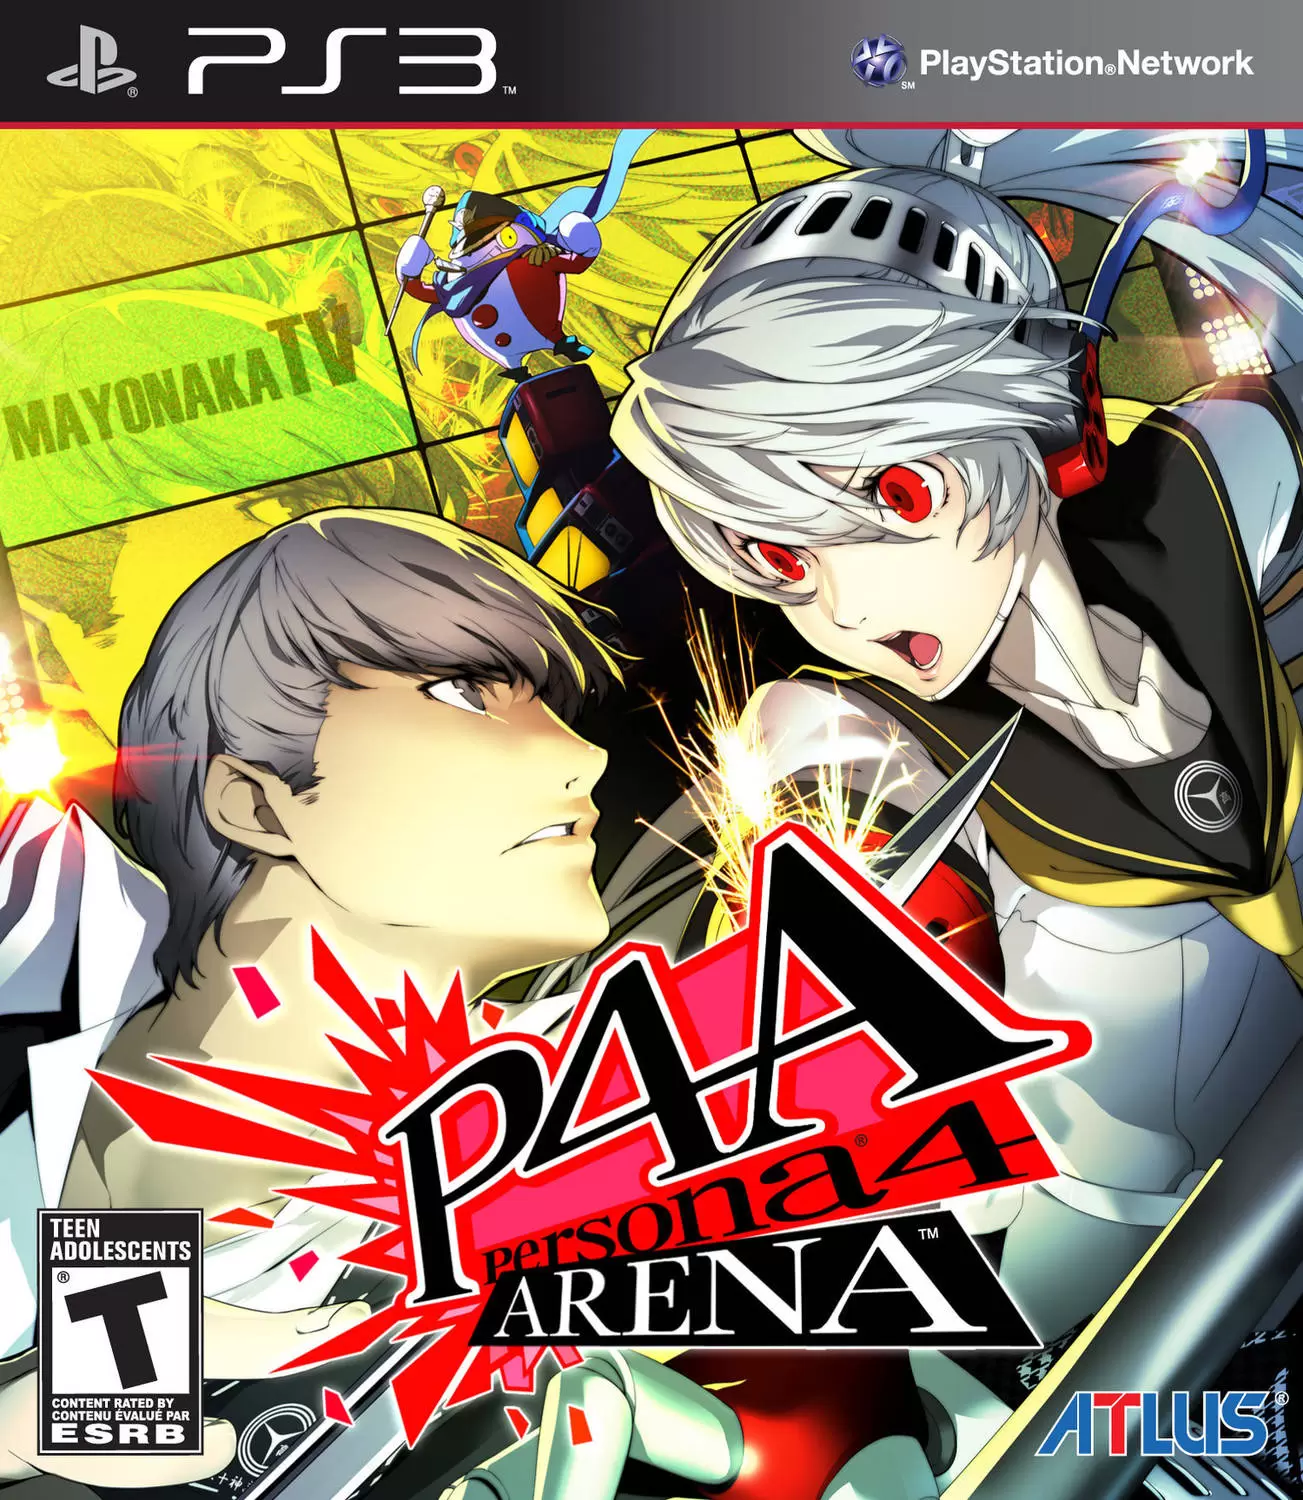 Jeux PS3 - Persona 4 Arena